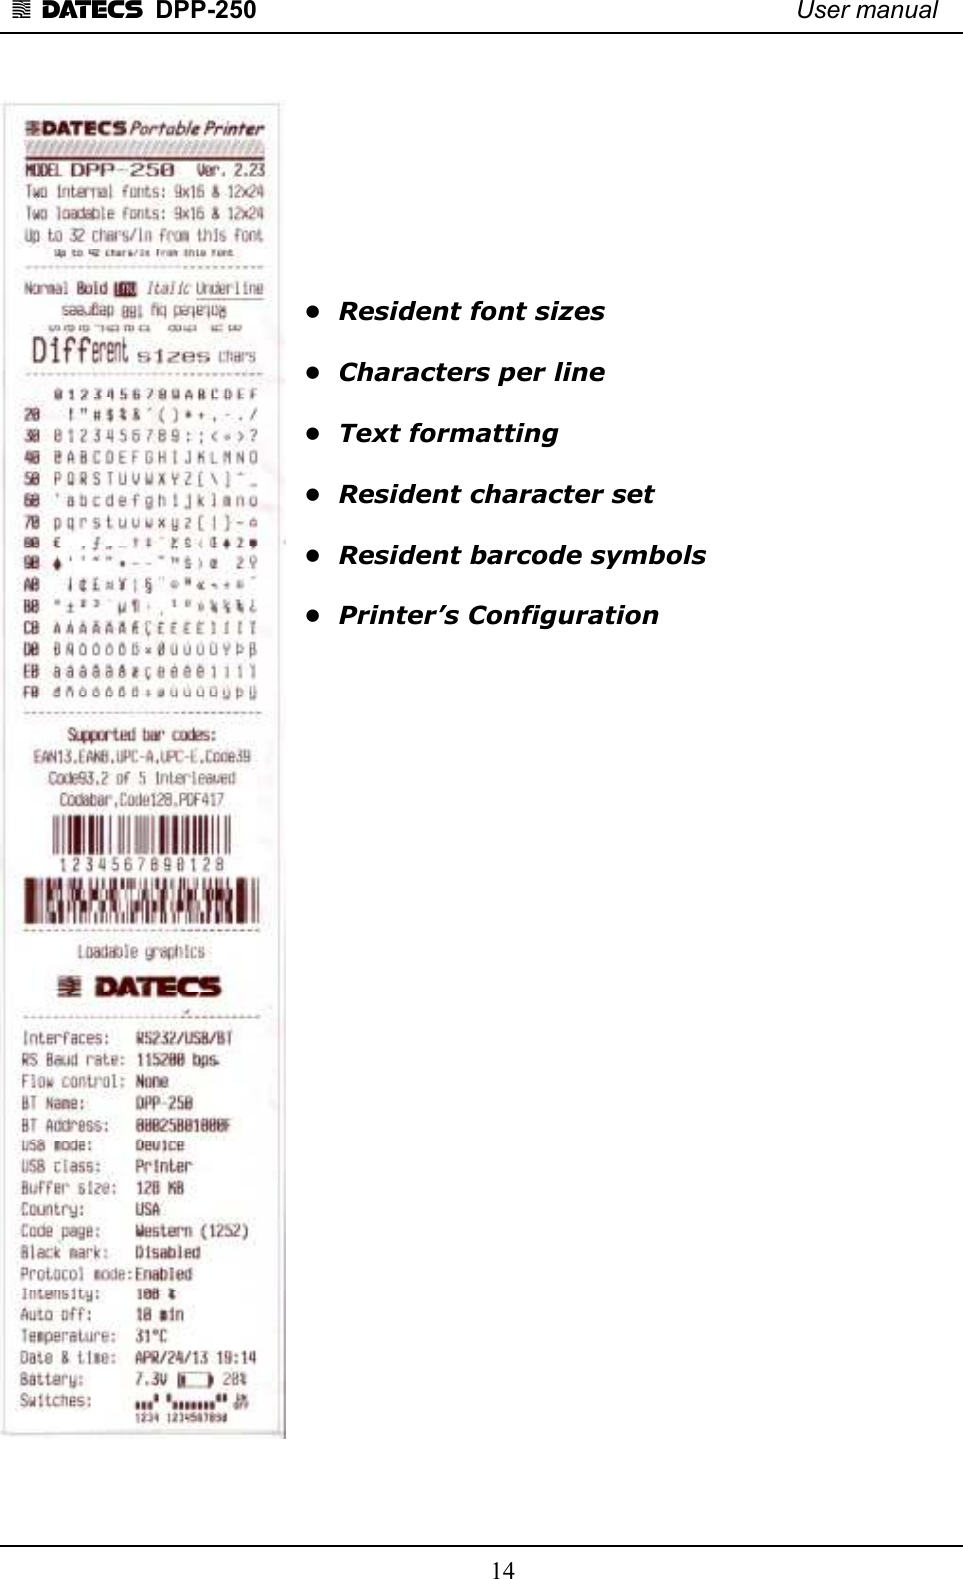 1 DATECS  DPP-250    User manual     14         •  Resident font sizes                              •  Characters per line   •  Text formatting   •  Resident character set   •  Resident barcode symbols   •  Printer’s Configuration                             